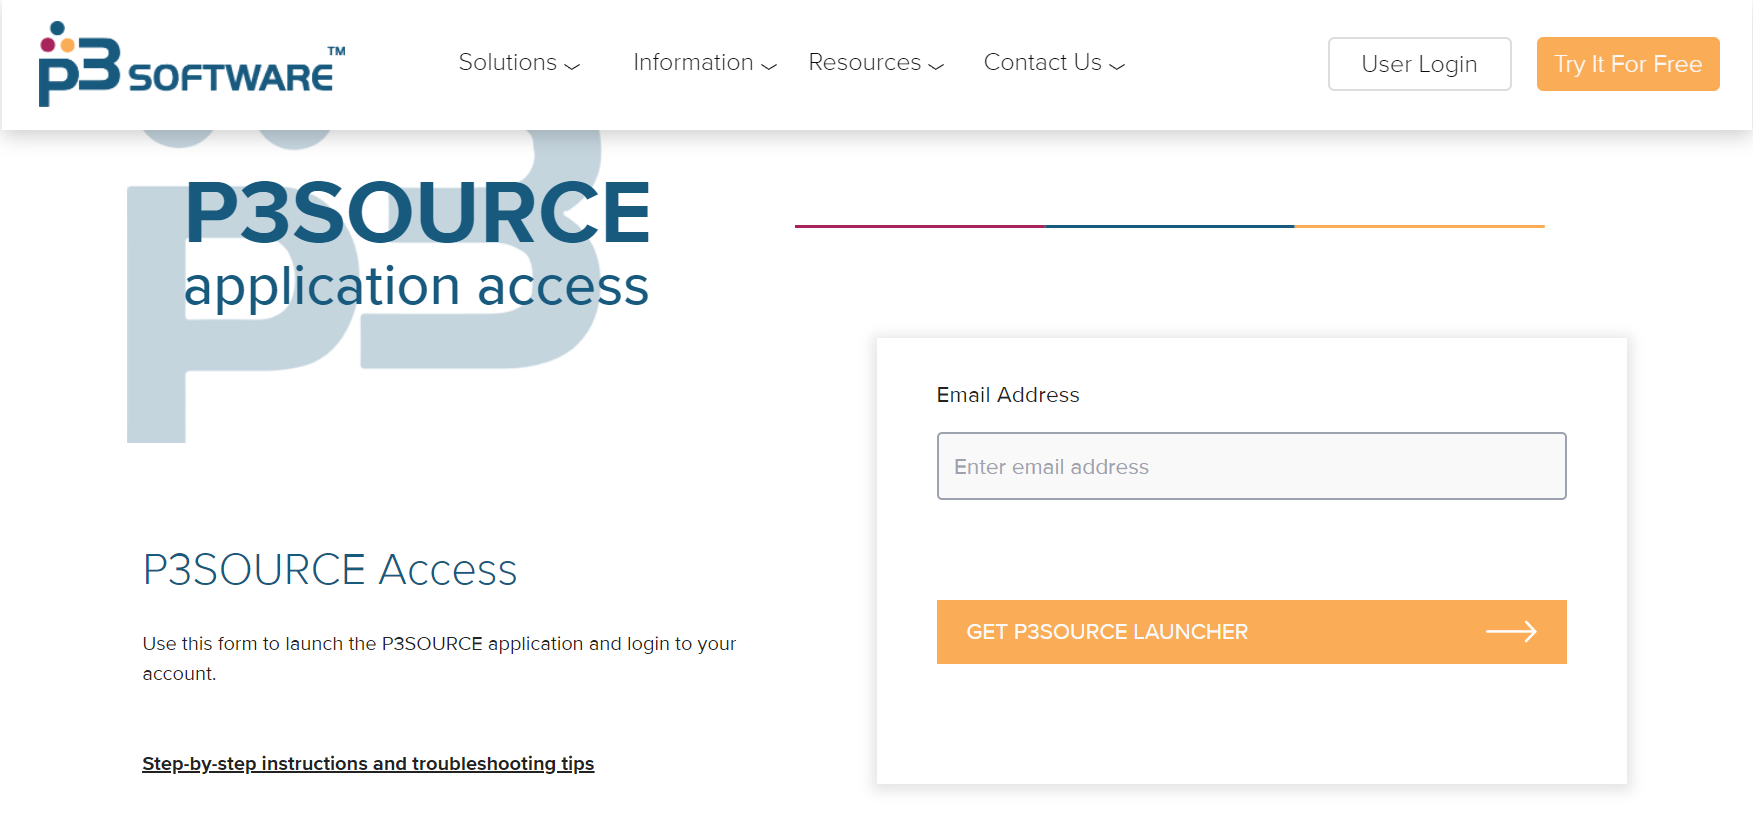 The P3Source Login web page